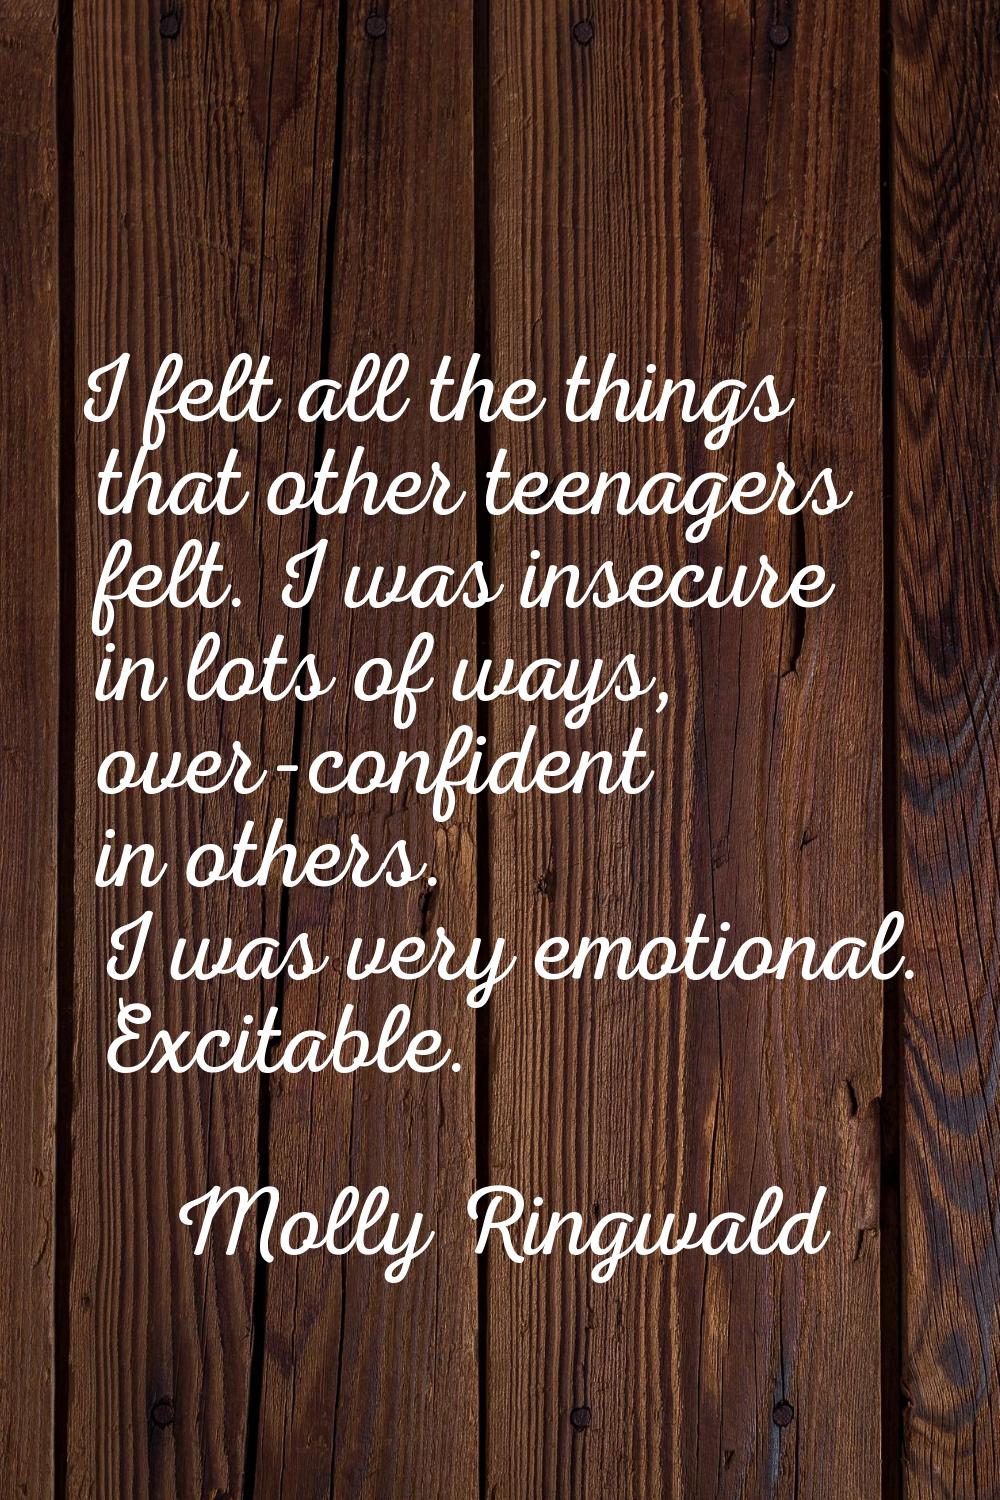 I felt all the things that other teenagers felt. I was insecure in lots of ways, over-confident in 